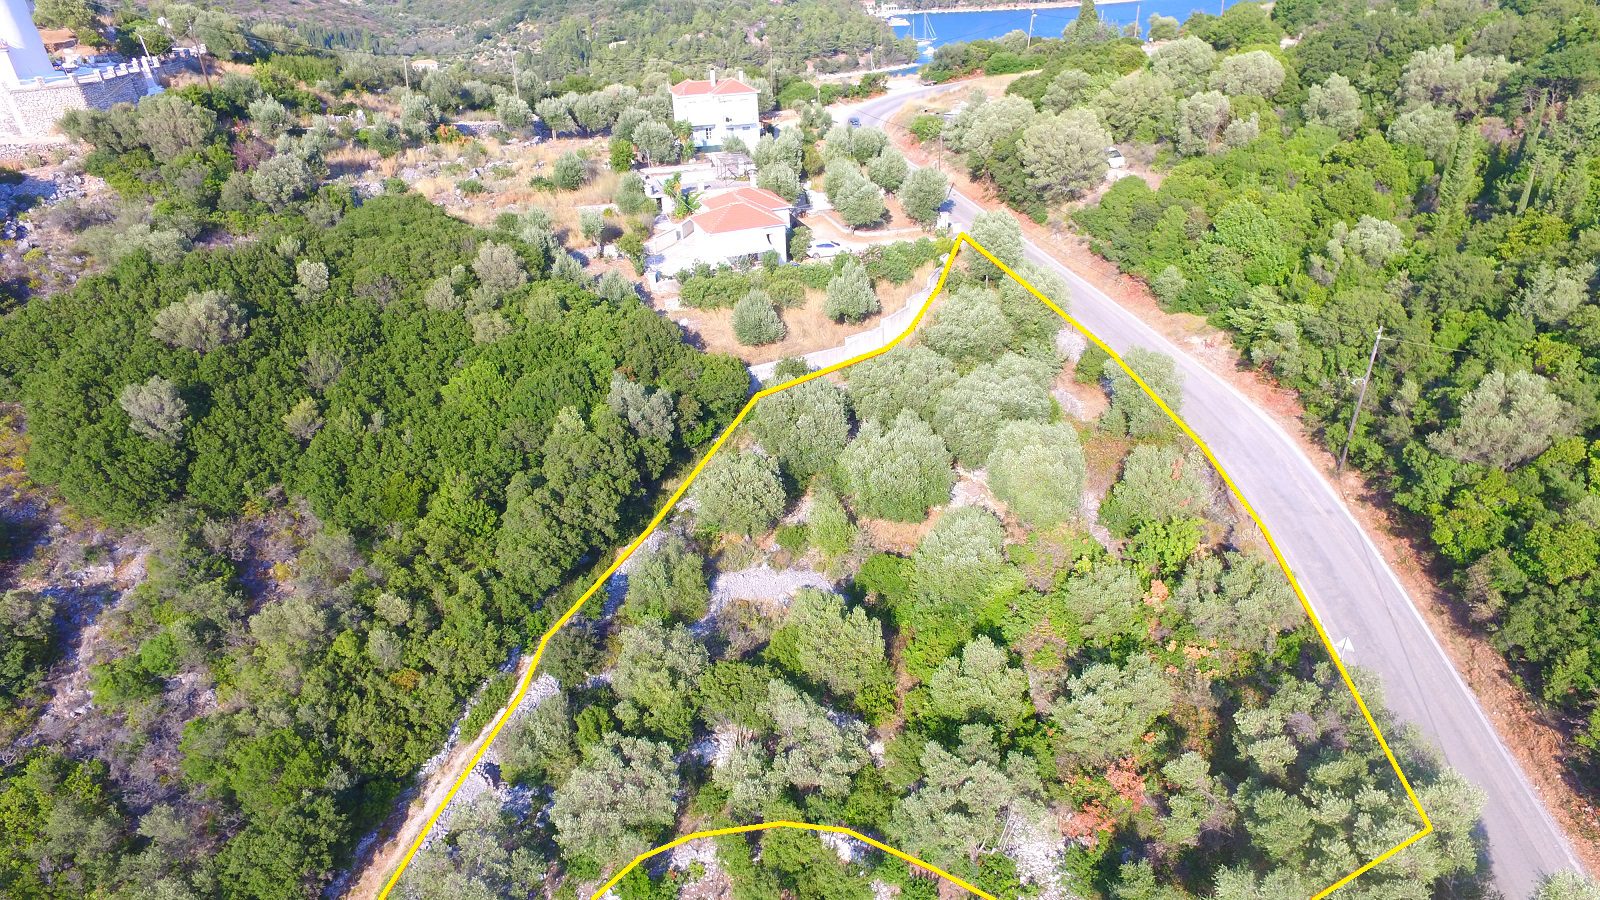 Aerial view of land for sale Ithaca Greece Dexa Vathi